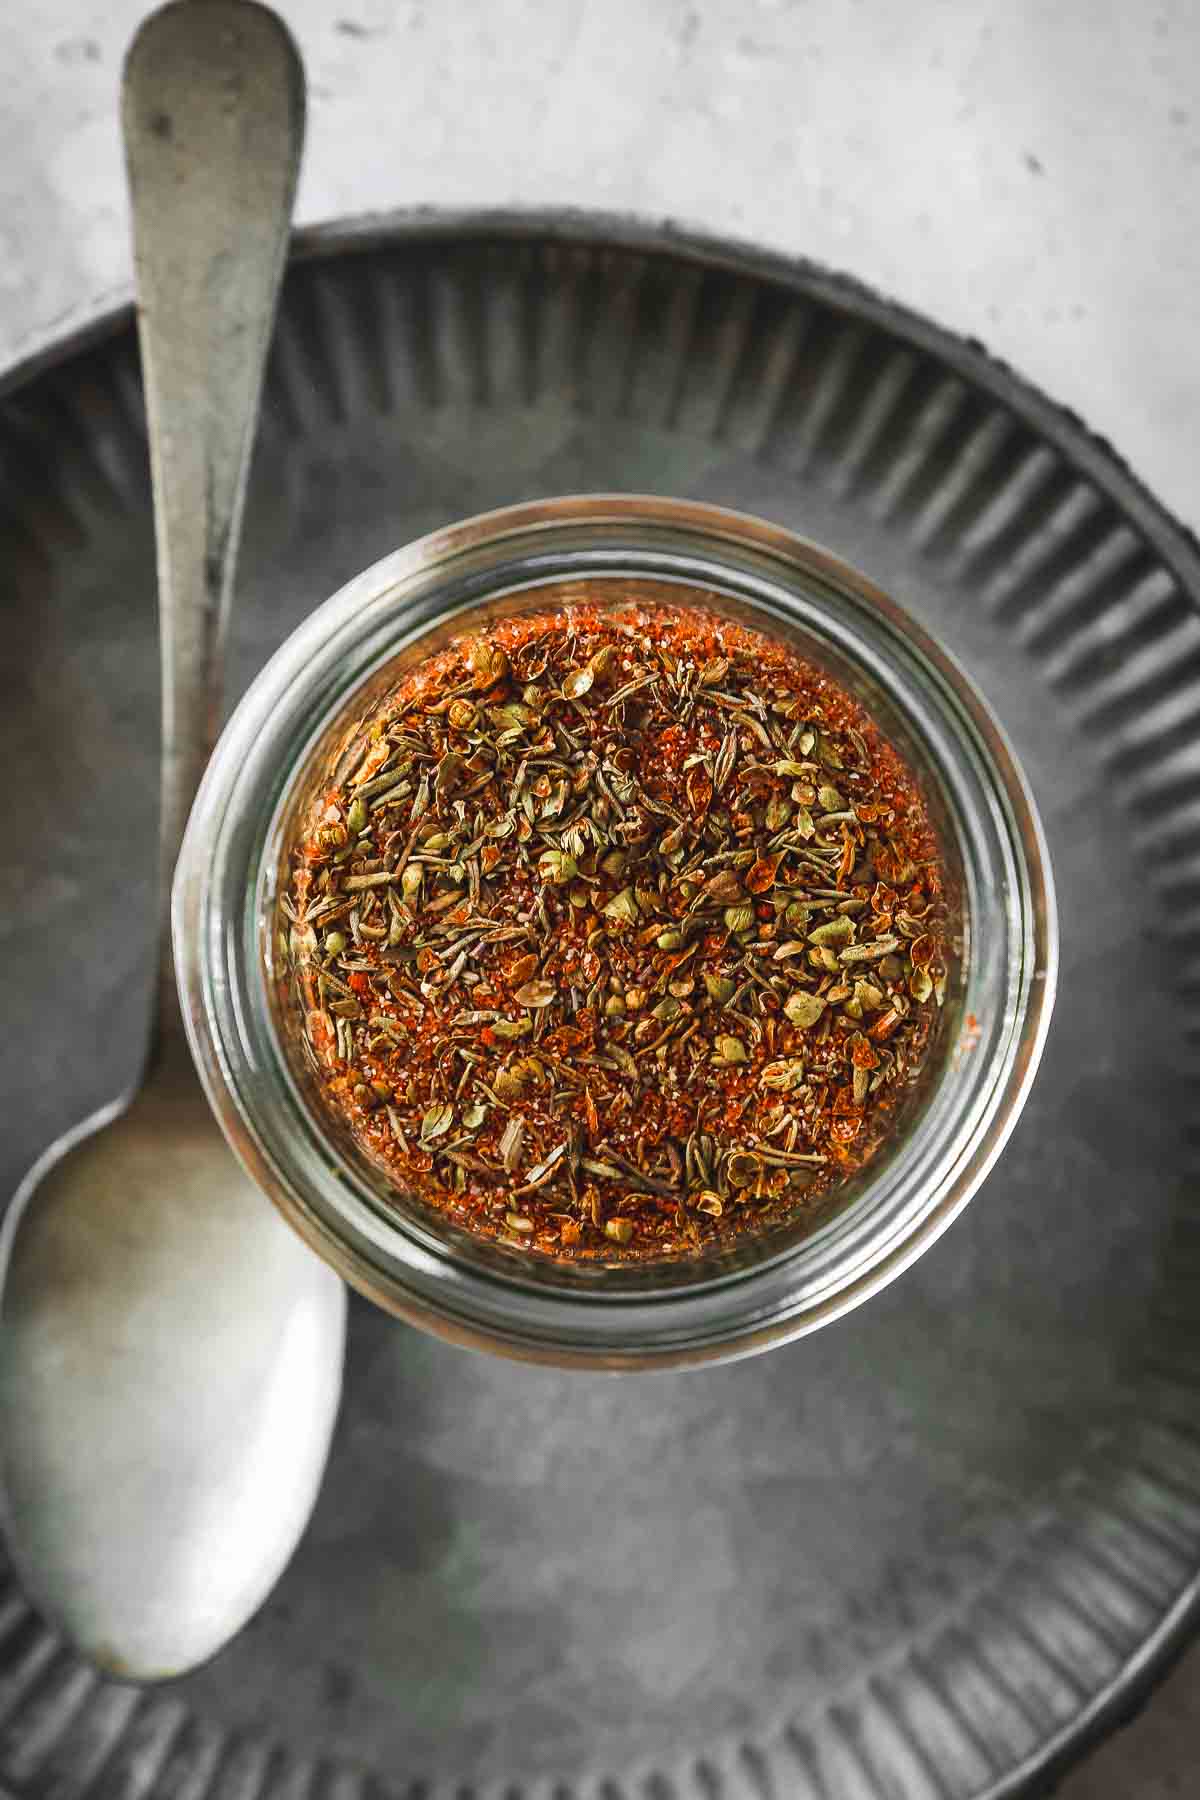 mixed spices and herbs for Cajun seasoning.